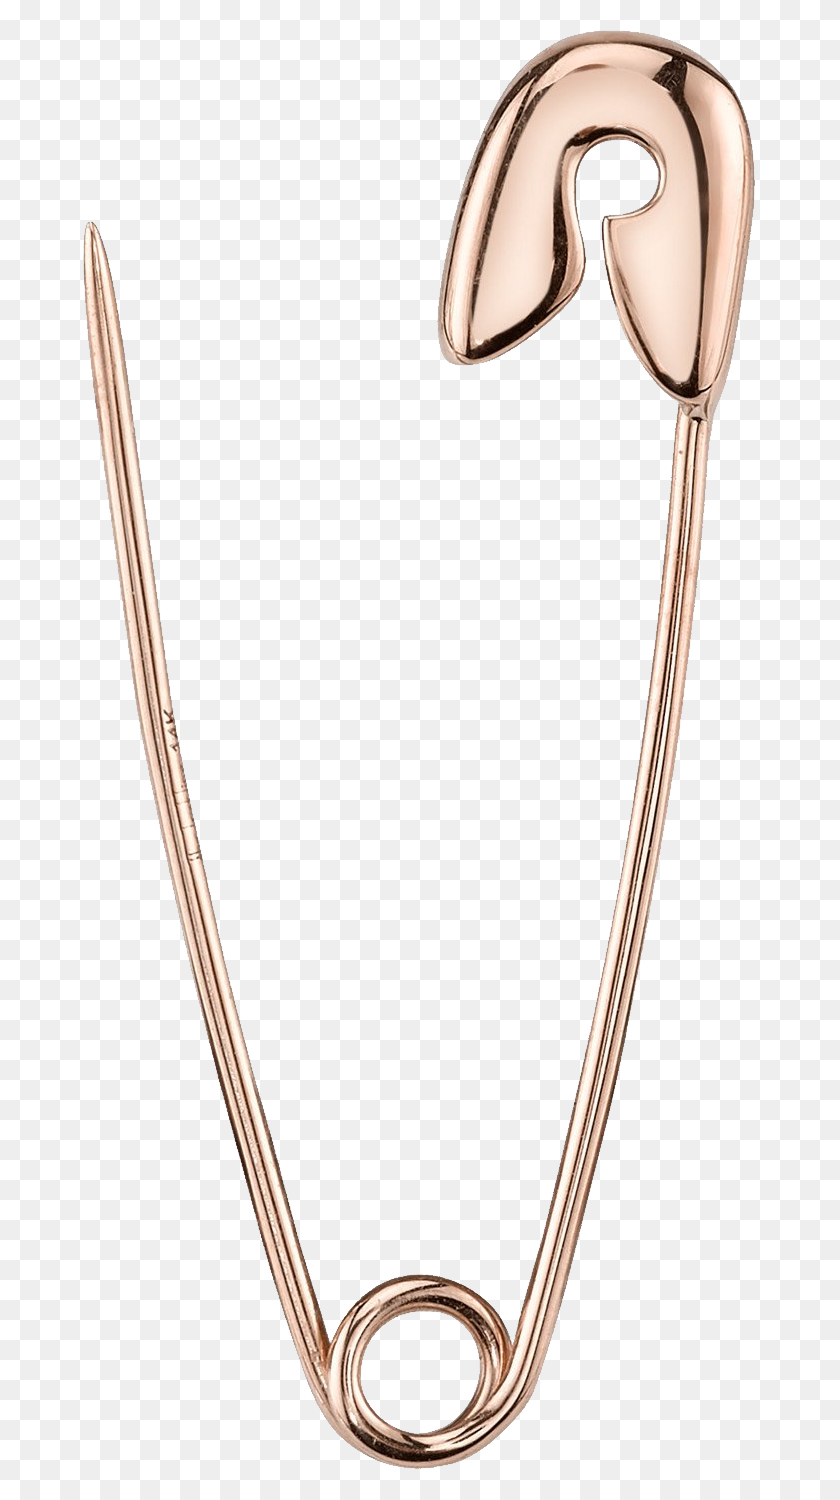 673x1440 Safety Pin Png Image - Safety Pin PNG